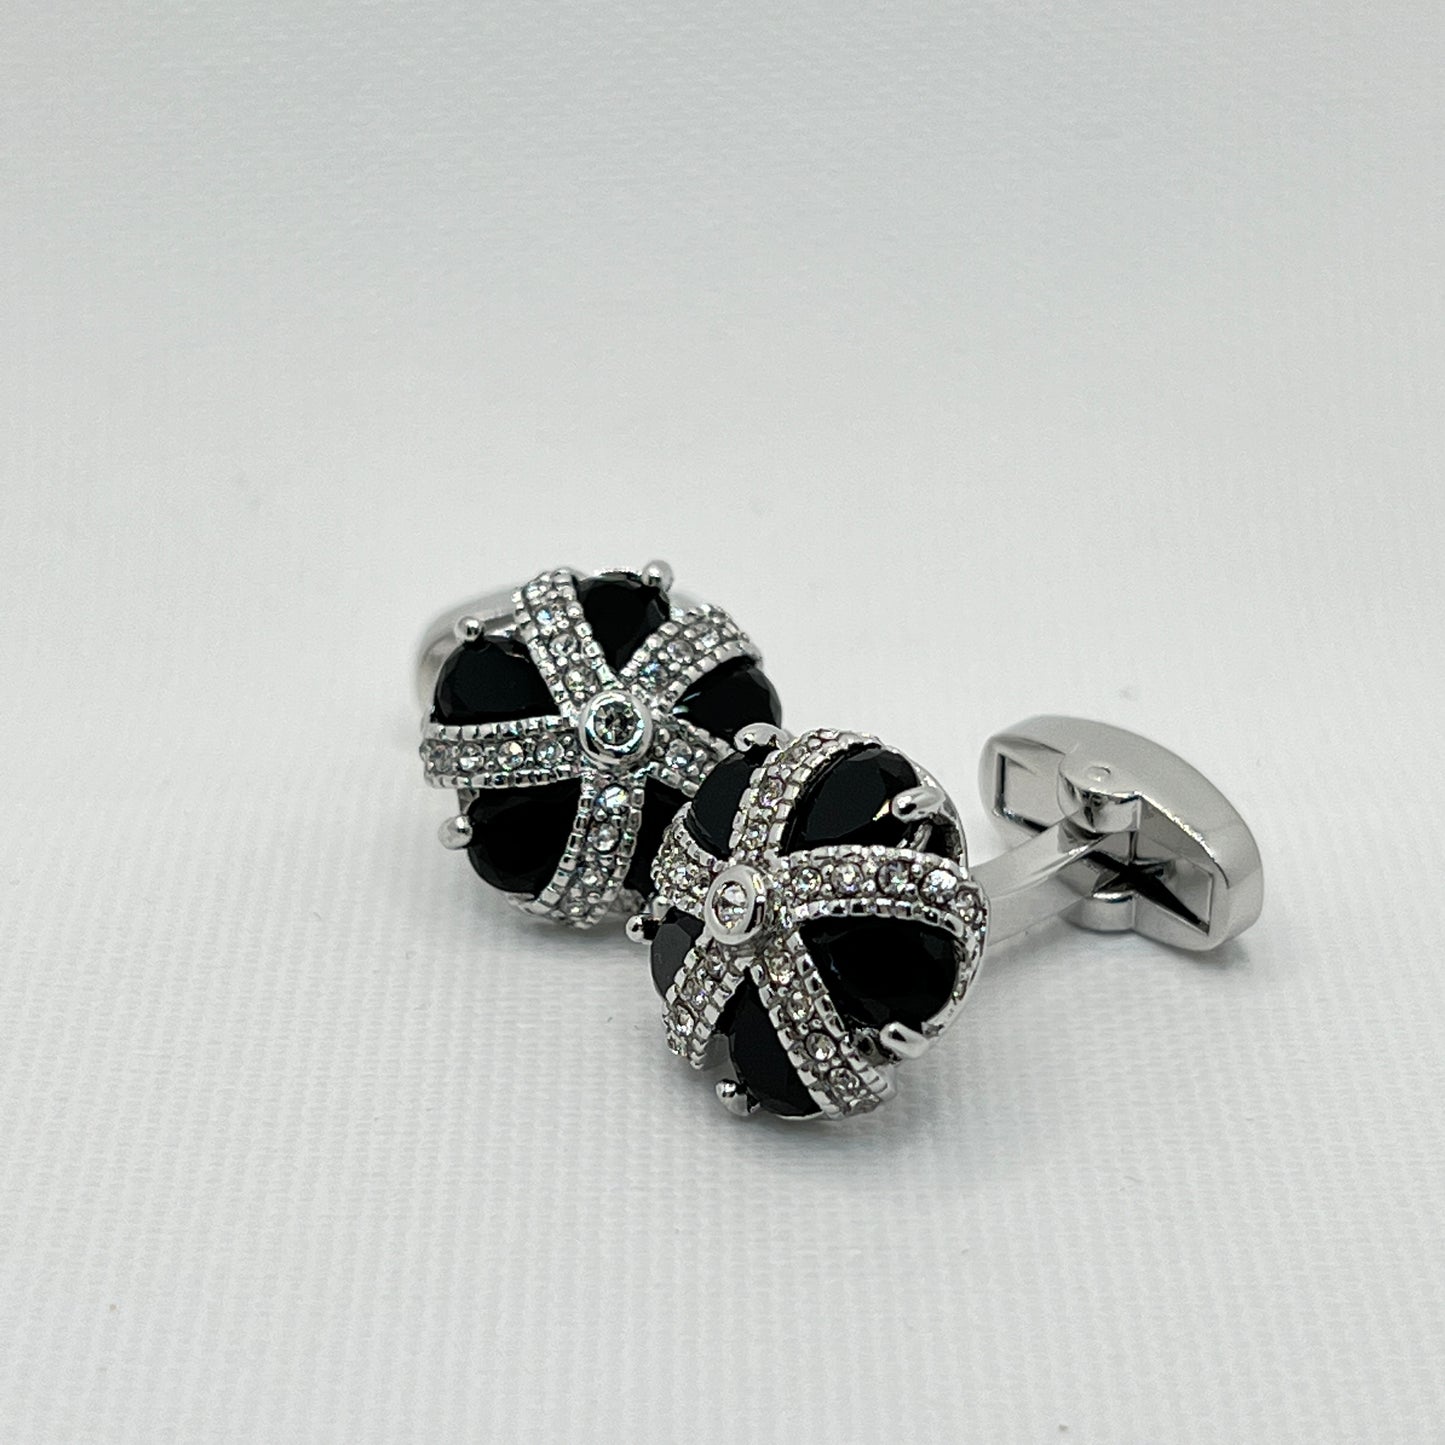 Tasker & Shaw | Luxury Menswear | Silver crown cufflinks with clear crystals and black inlay